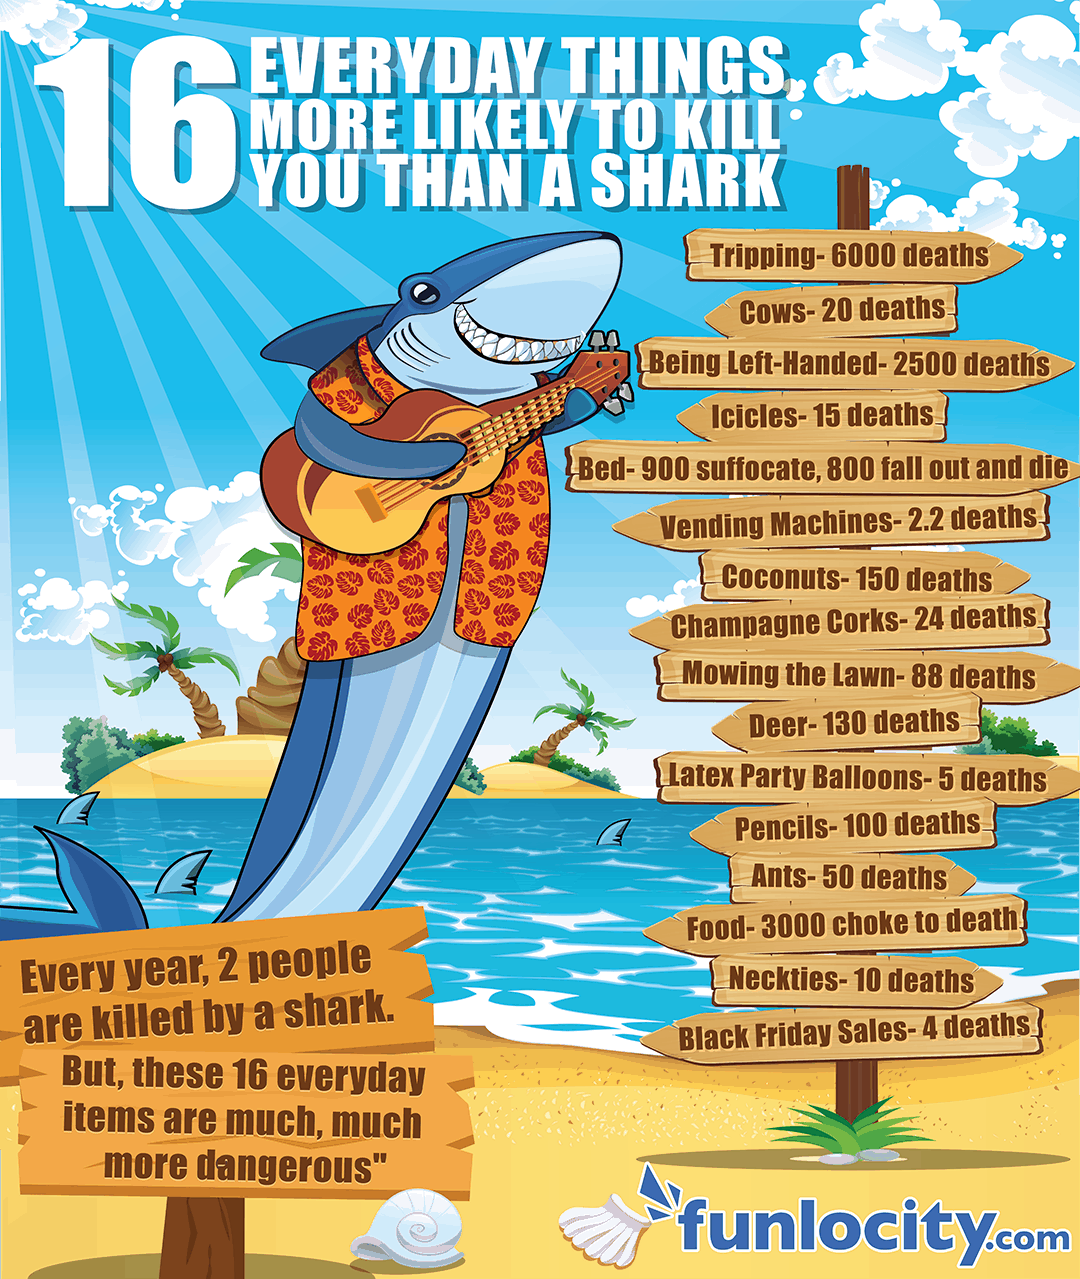 16-everyday-things-more-likely-to-kill-you-than-a-shark-funlocity-infographic